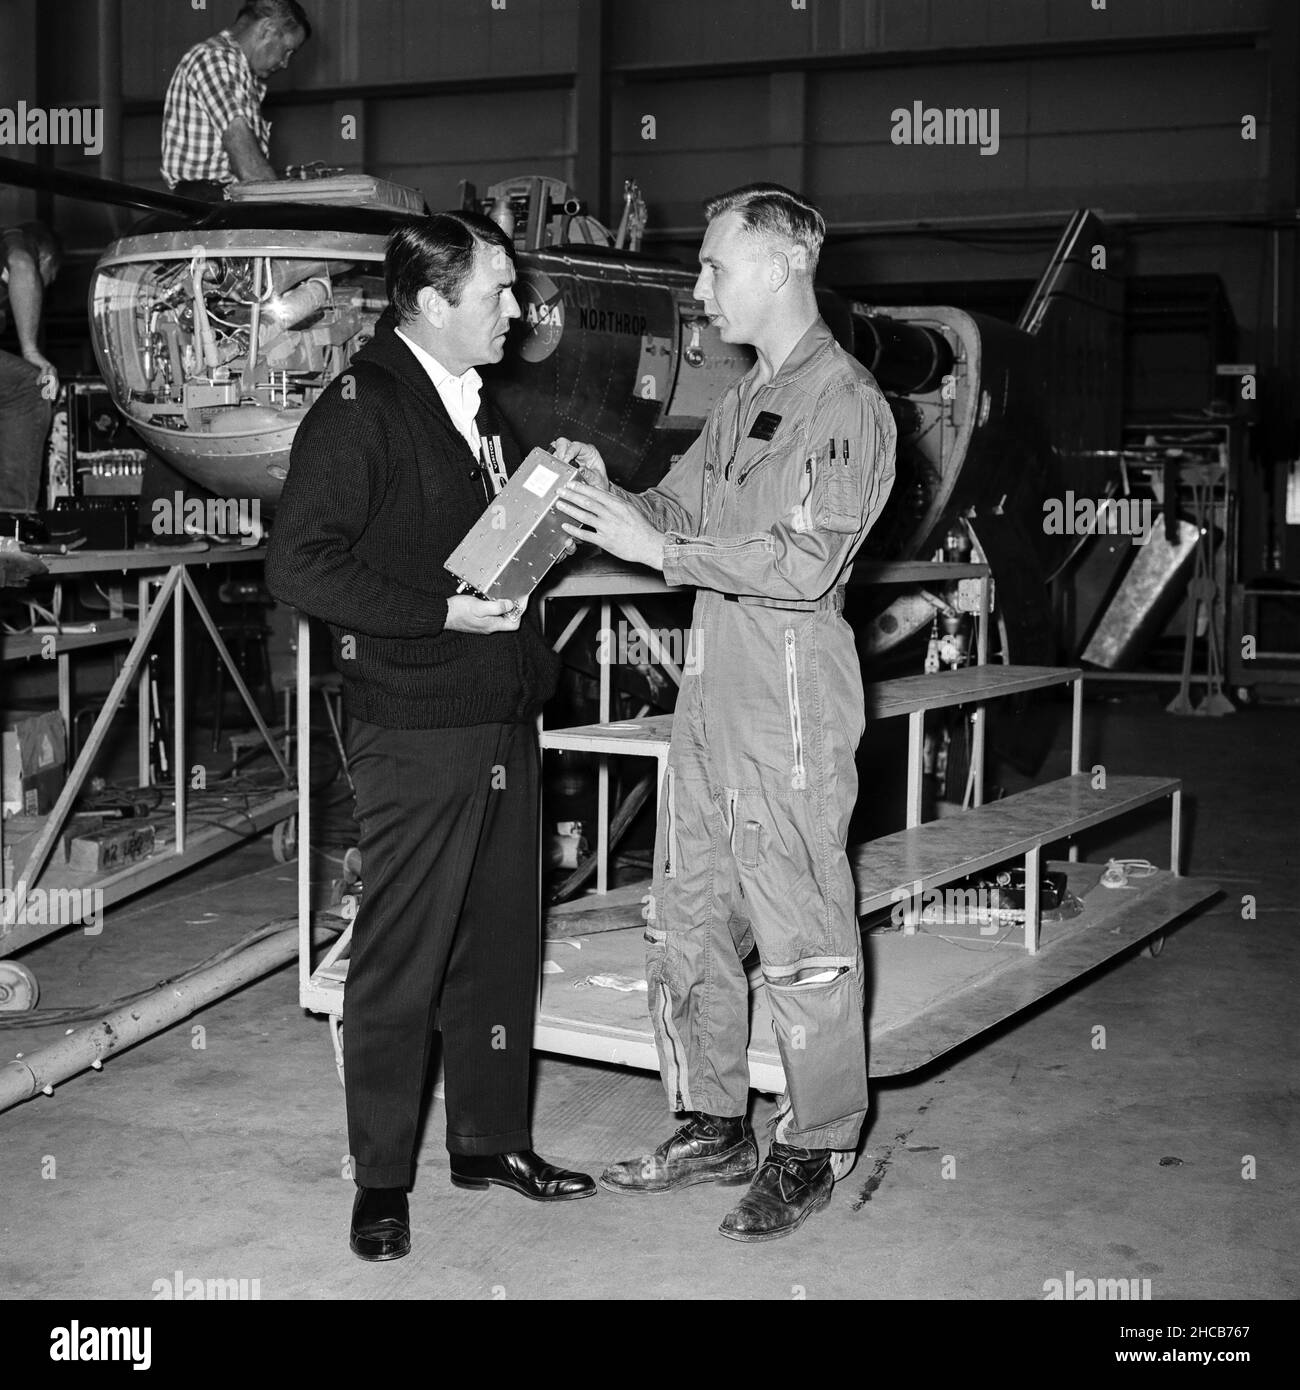 The 1960s Star Trek television series’ cast members visit NASA Dryden Flight Research Center, now called Armstrong, in 1967. The show’s Chief Engineer Montgomery ‘Scotty’ Scott played by James Doohan talks with NASA Pilot Bruce Peterson. Stock Photo